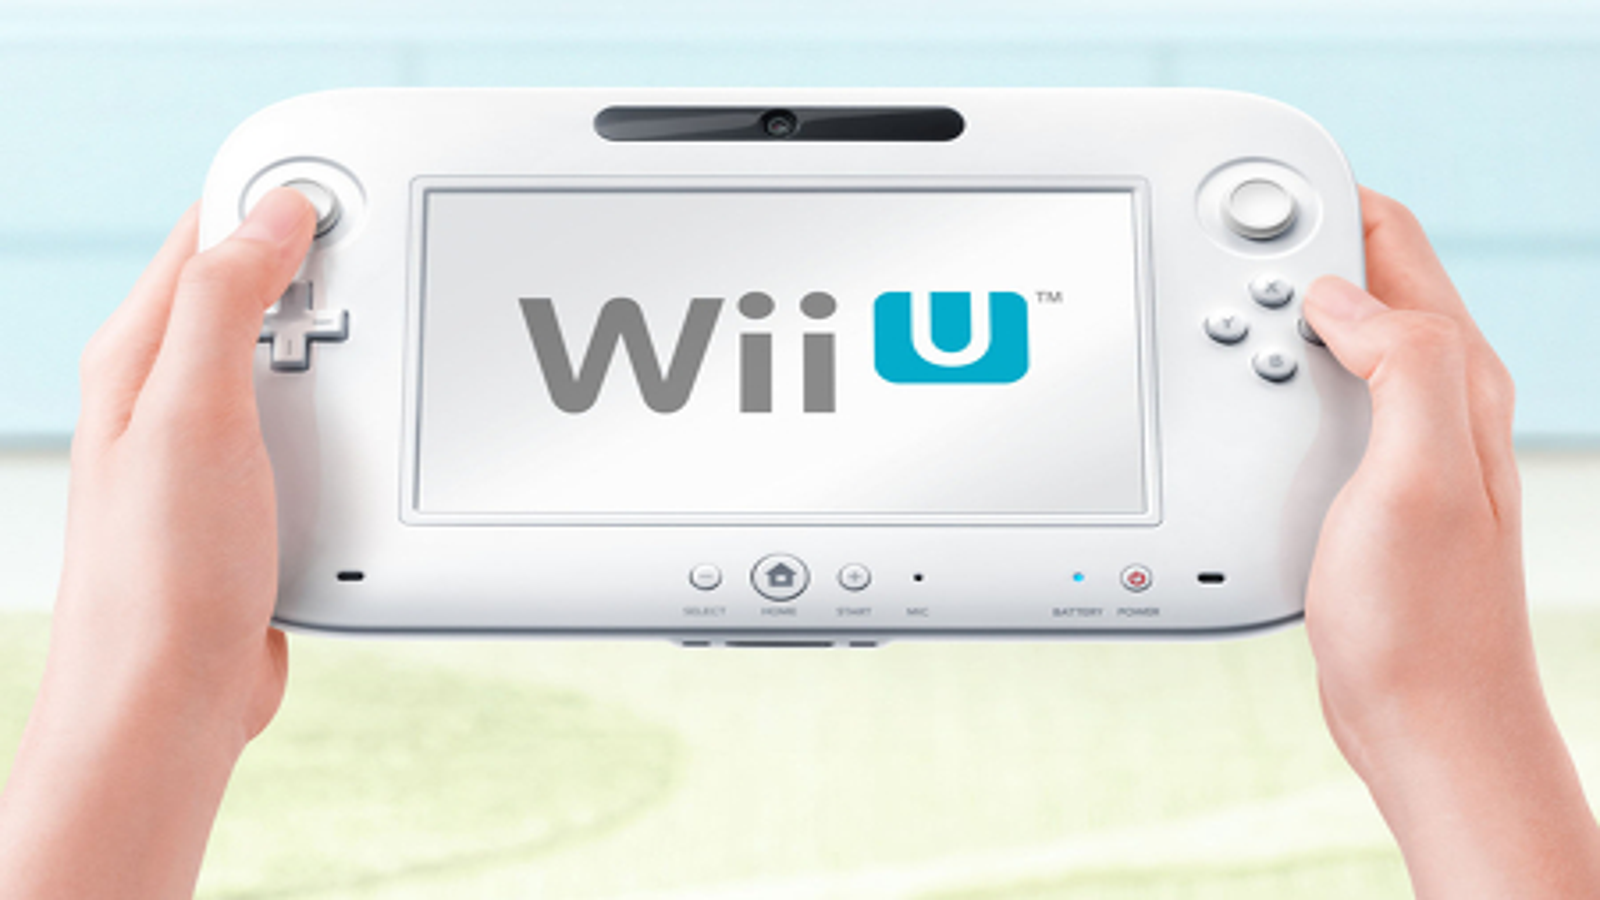 E3: Hands-on with the new Nintendo Wii U GamePad - Movies Games and Tech